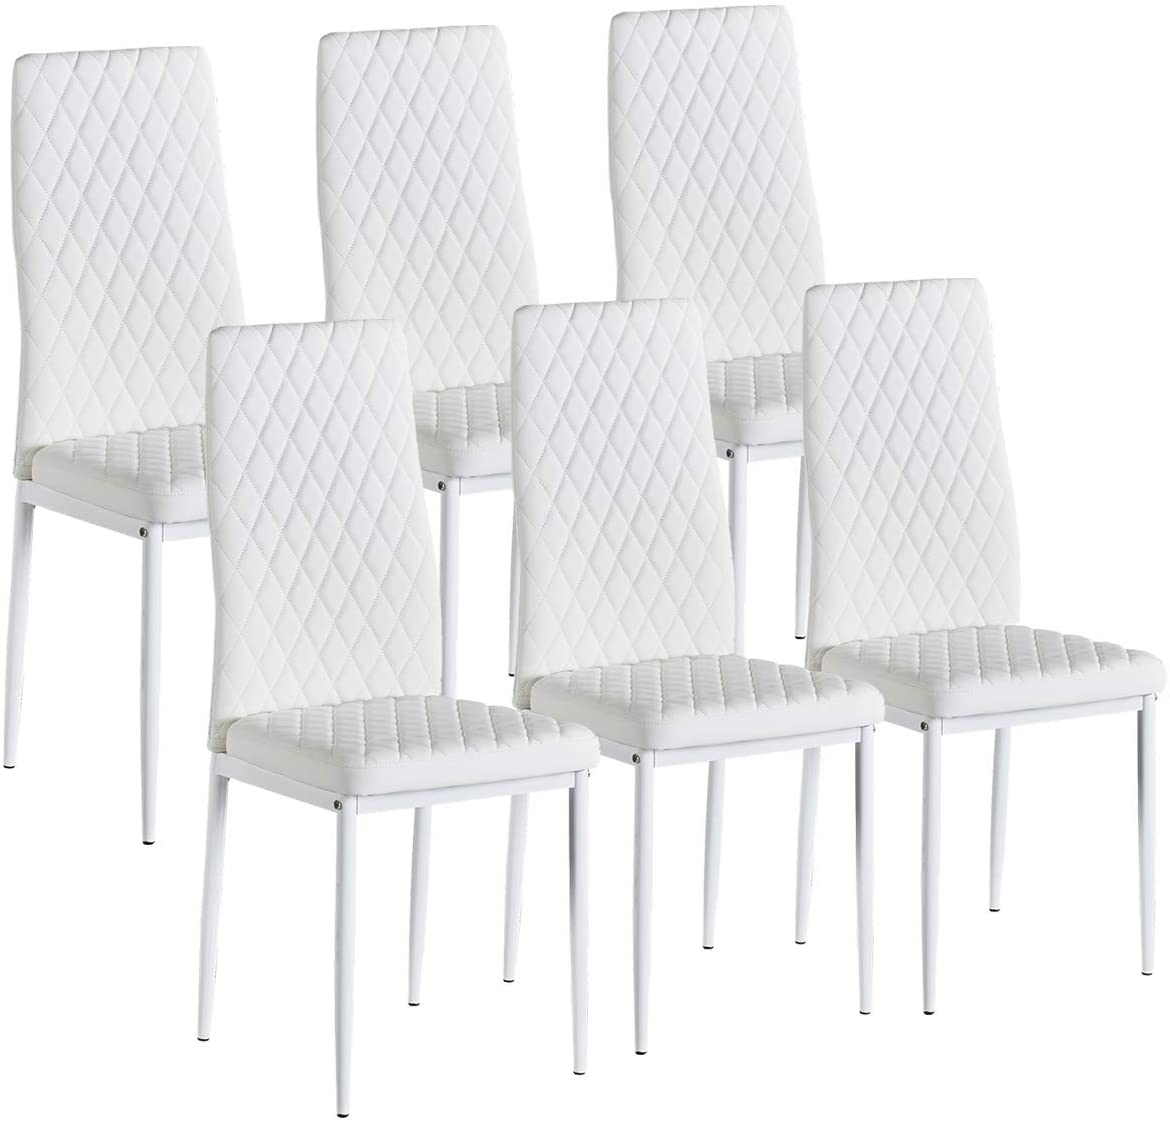 B08R63CLQL Dining Chairs Set of 6, PU Leather Kitchen Dining Side Chairs with Ergonomic Curved backrest, Mid-Century Modern Dining Chairs with Upholstered Cushion & Metal Legs for Kitchen Dining Room (White)